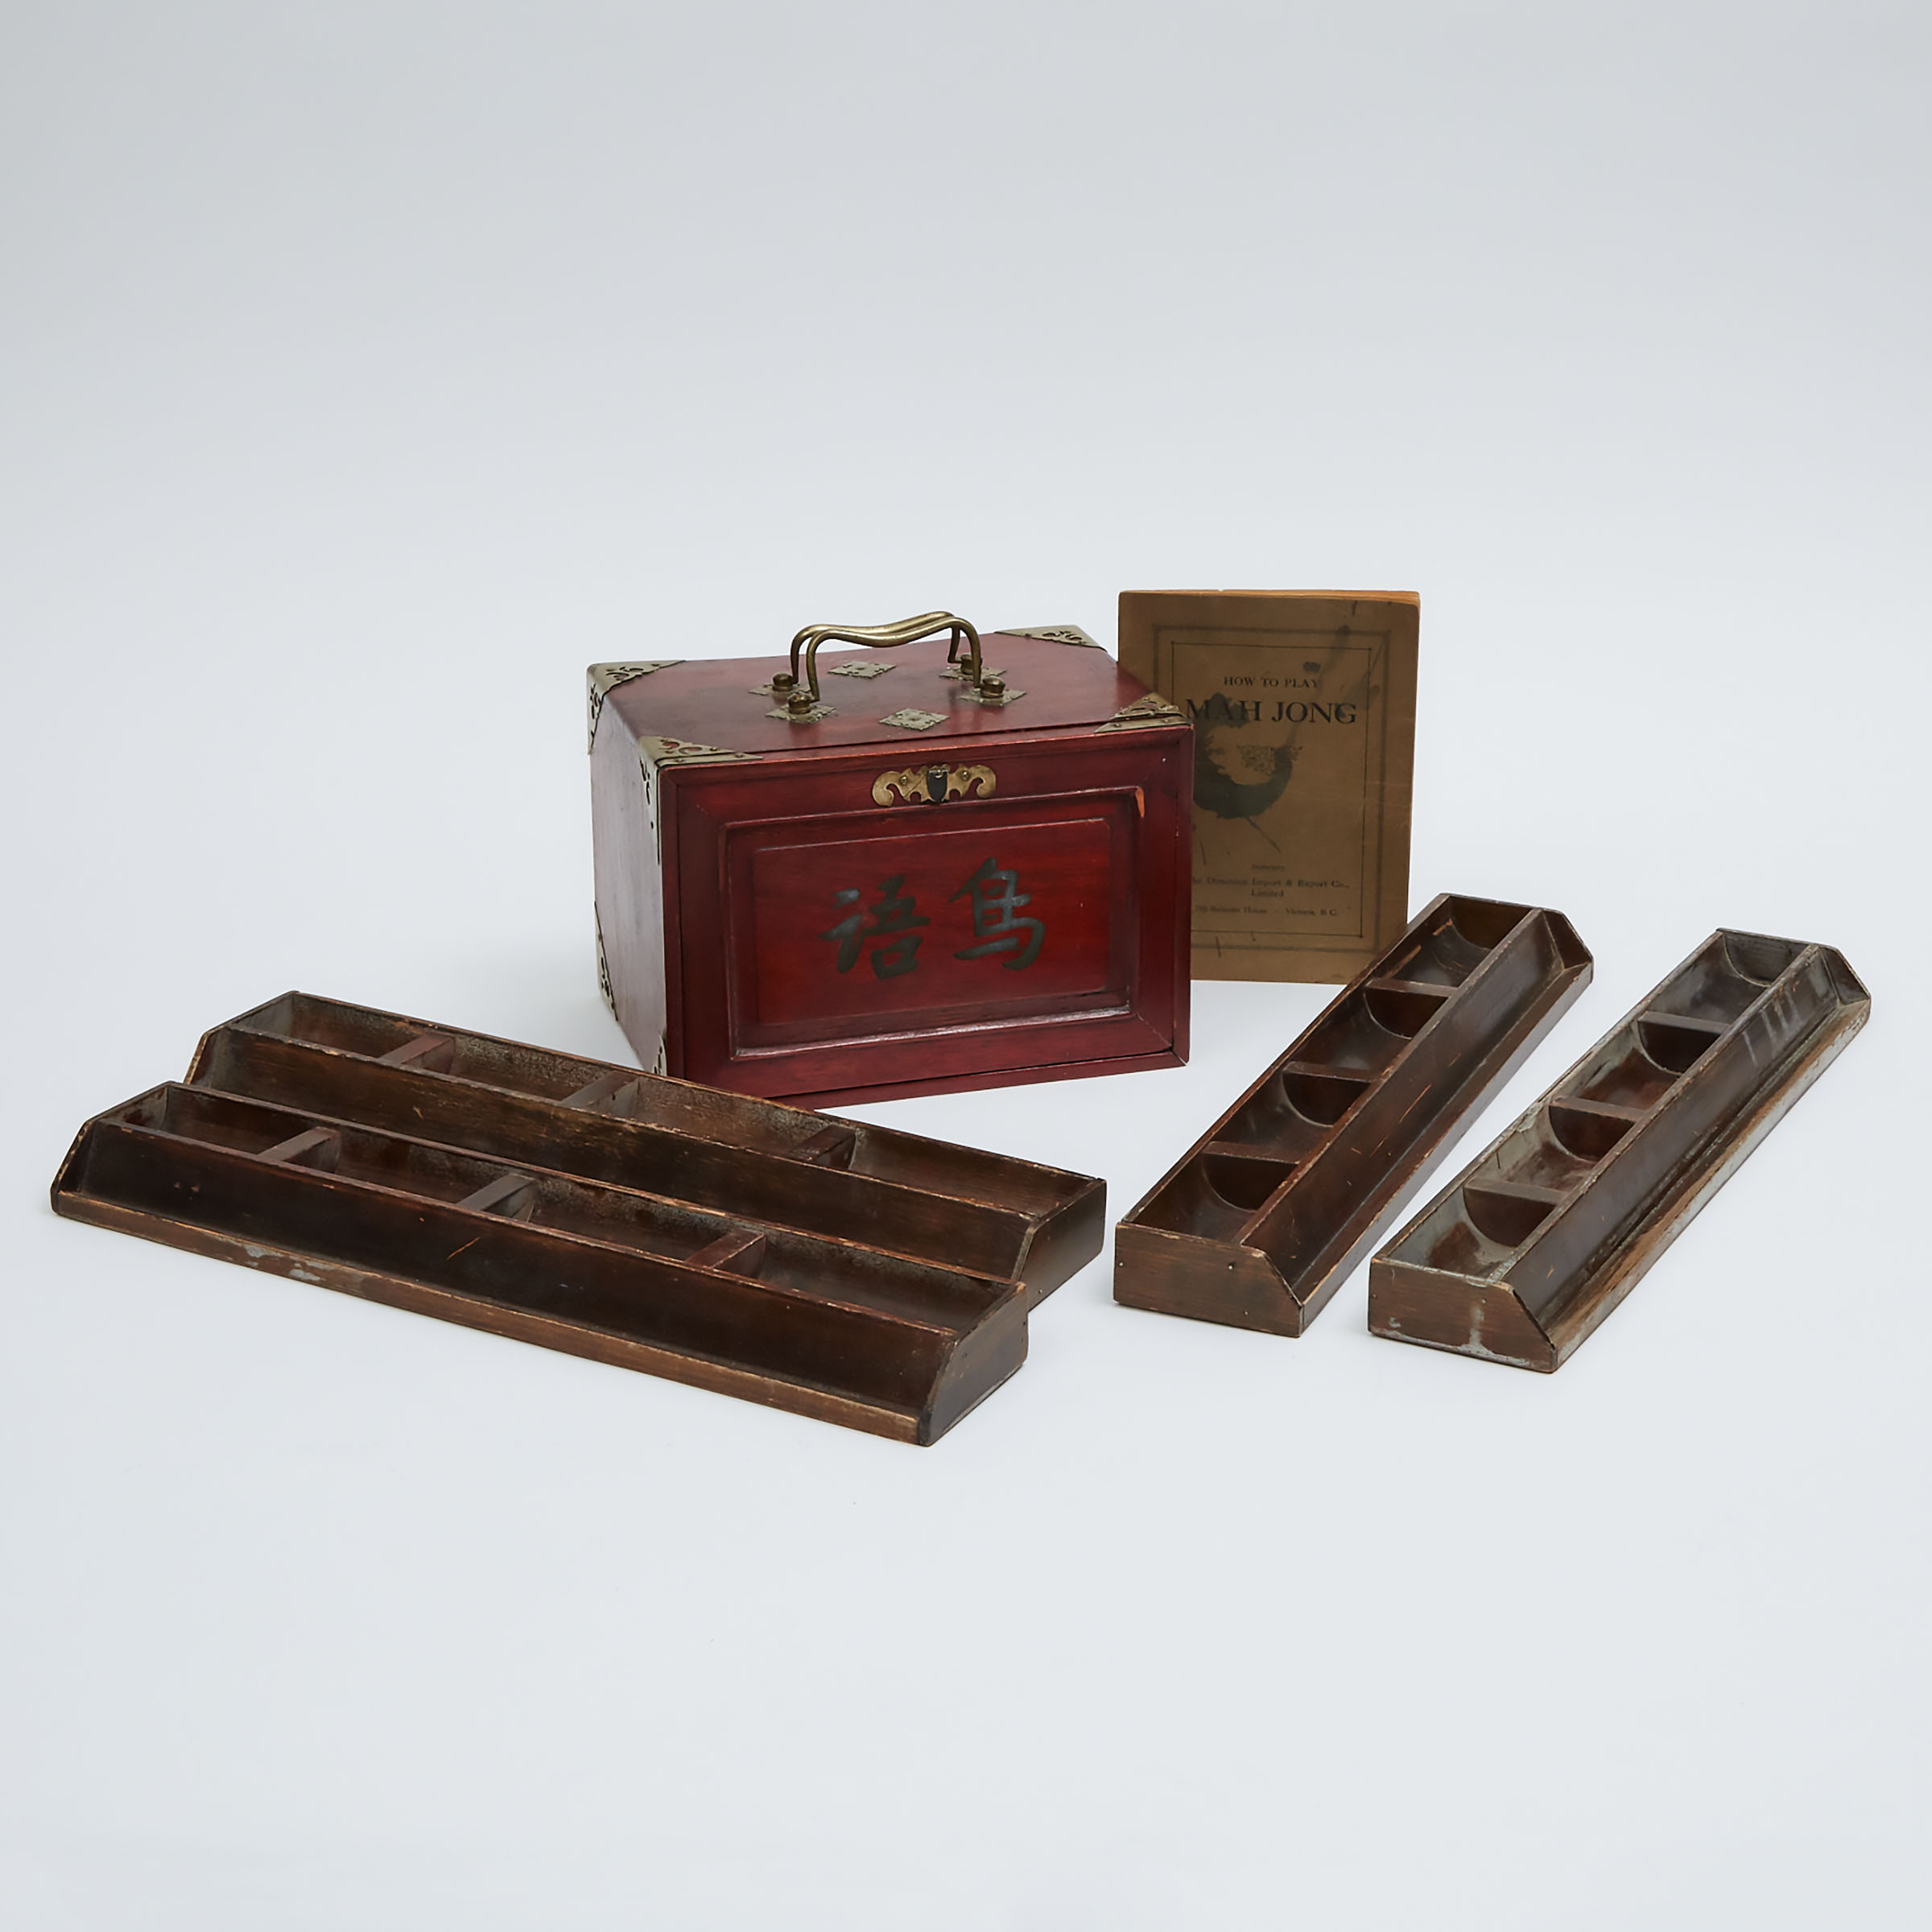 A Complete Mahjong Set With Bone and Bamboo Tiles and Wood Storage Box, Circa 1920